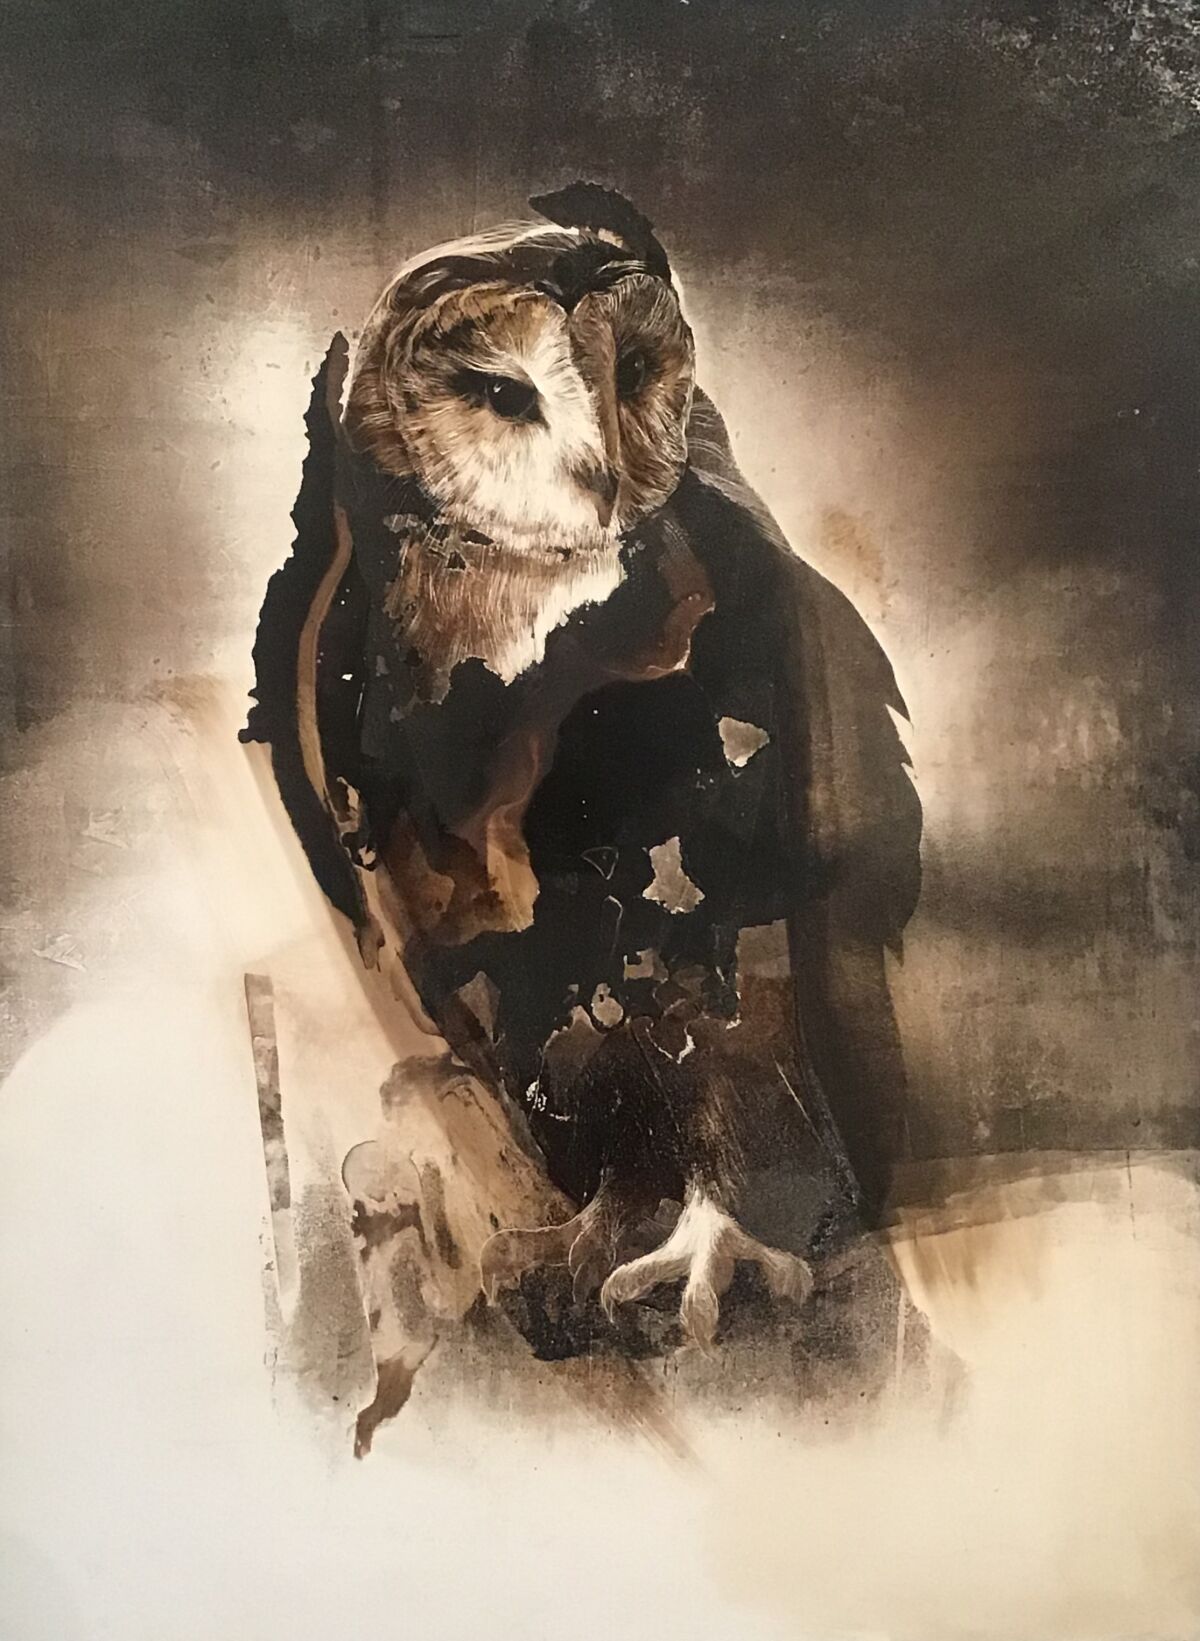 "Owl 2" by James Griffith, 2019. Tar on panel, 24 inches by 18